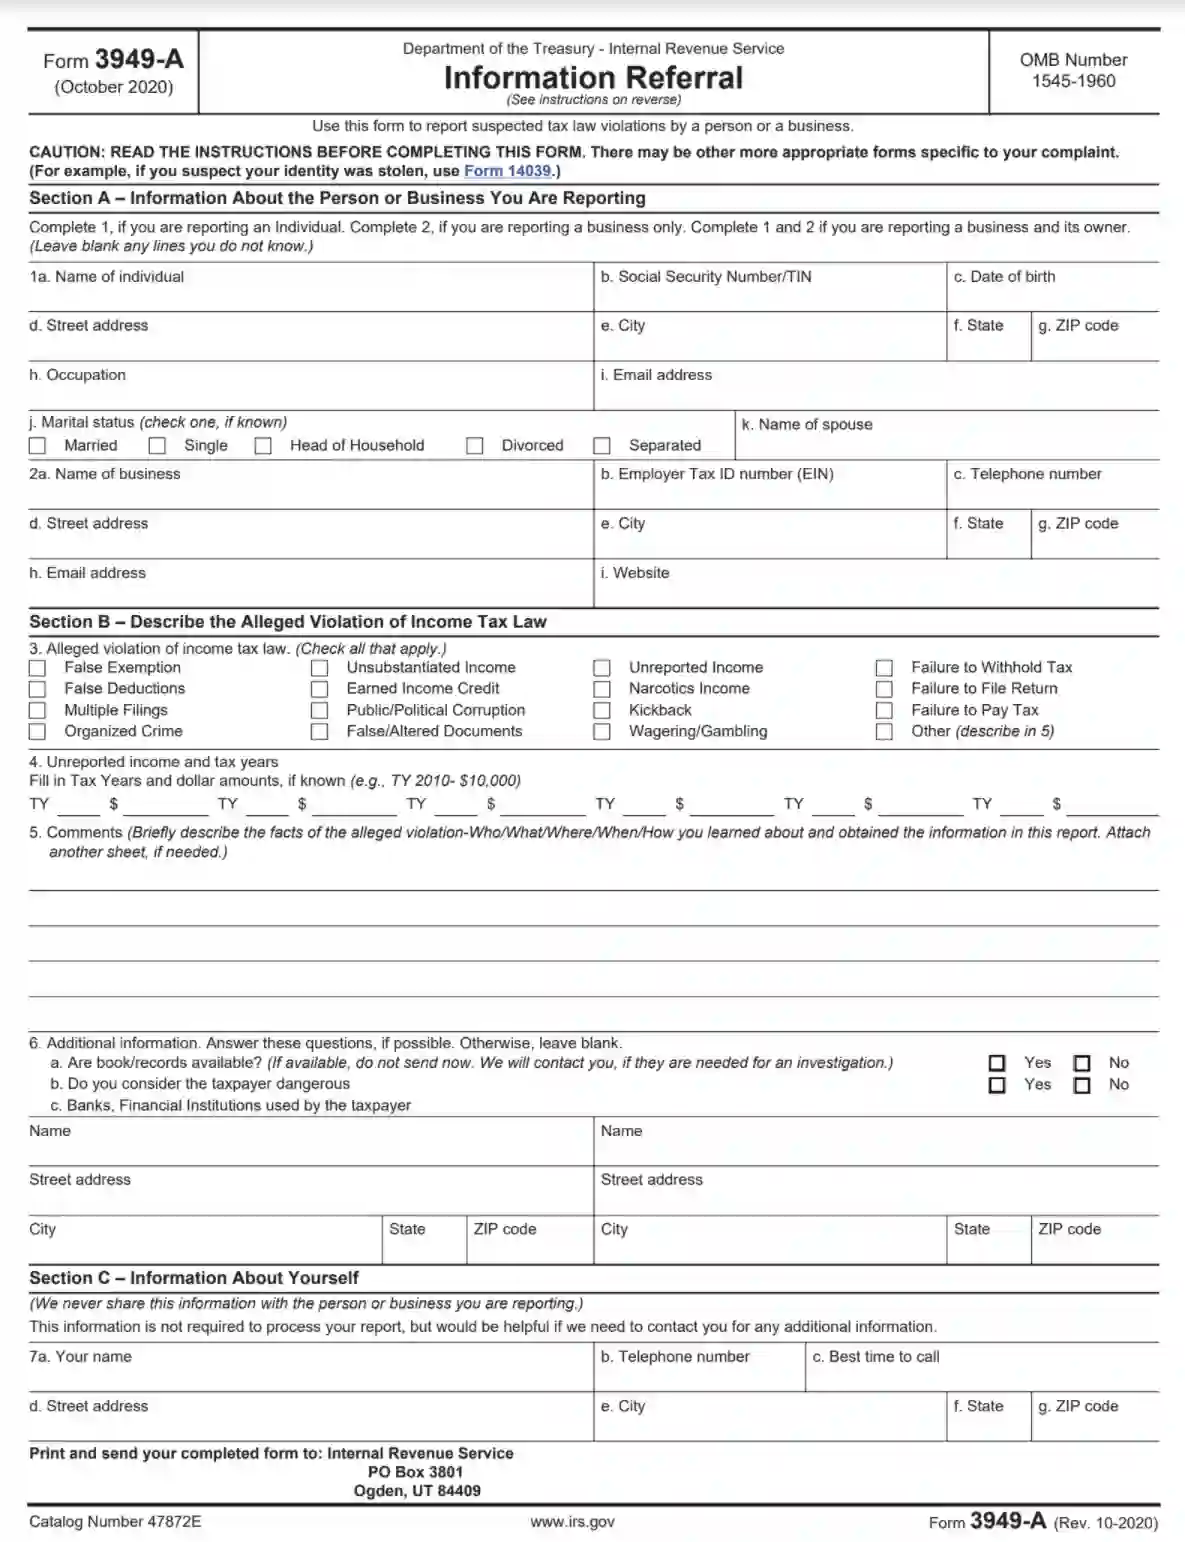 irs form 3949-a